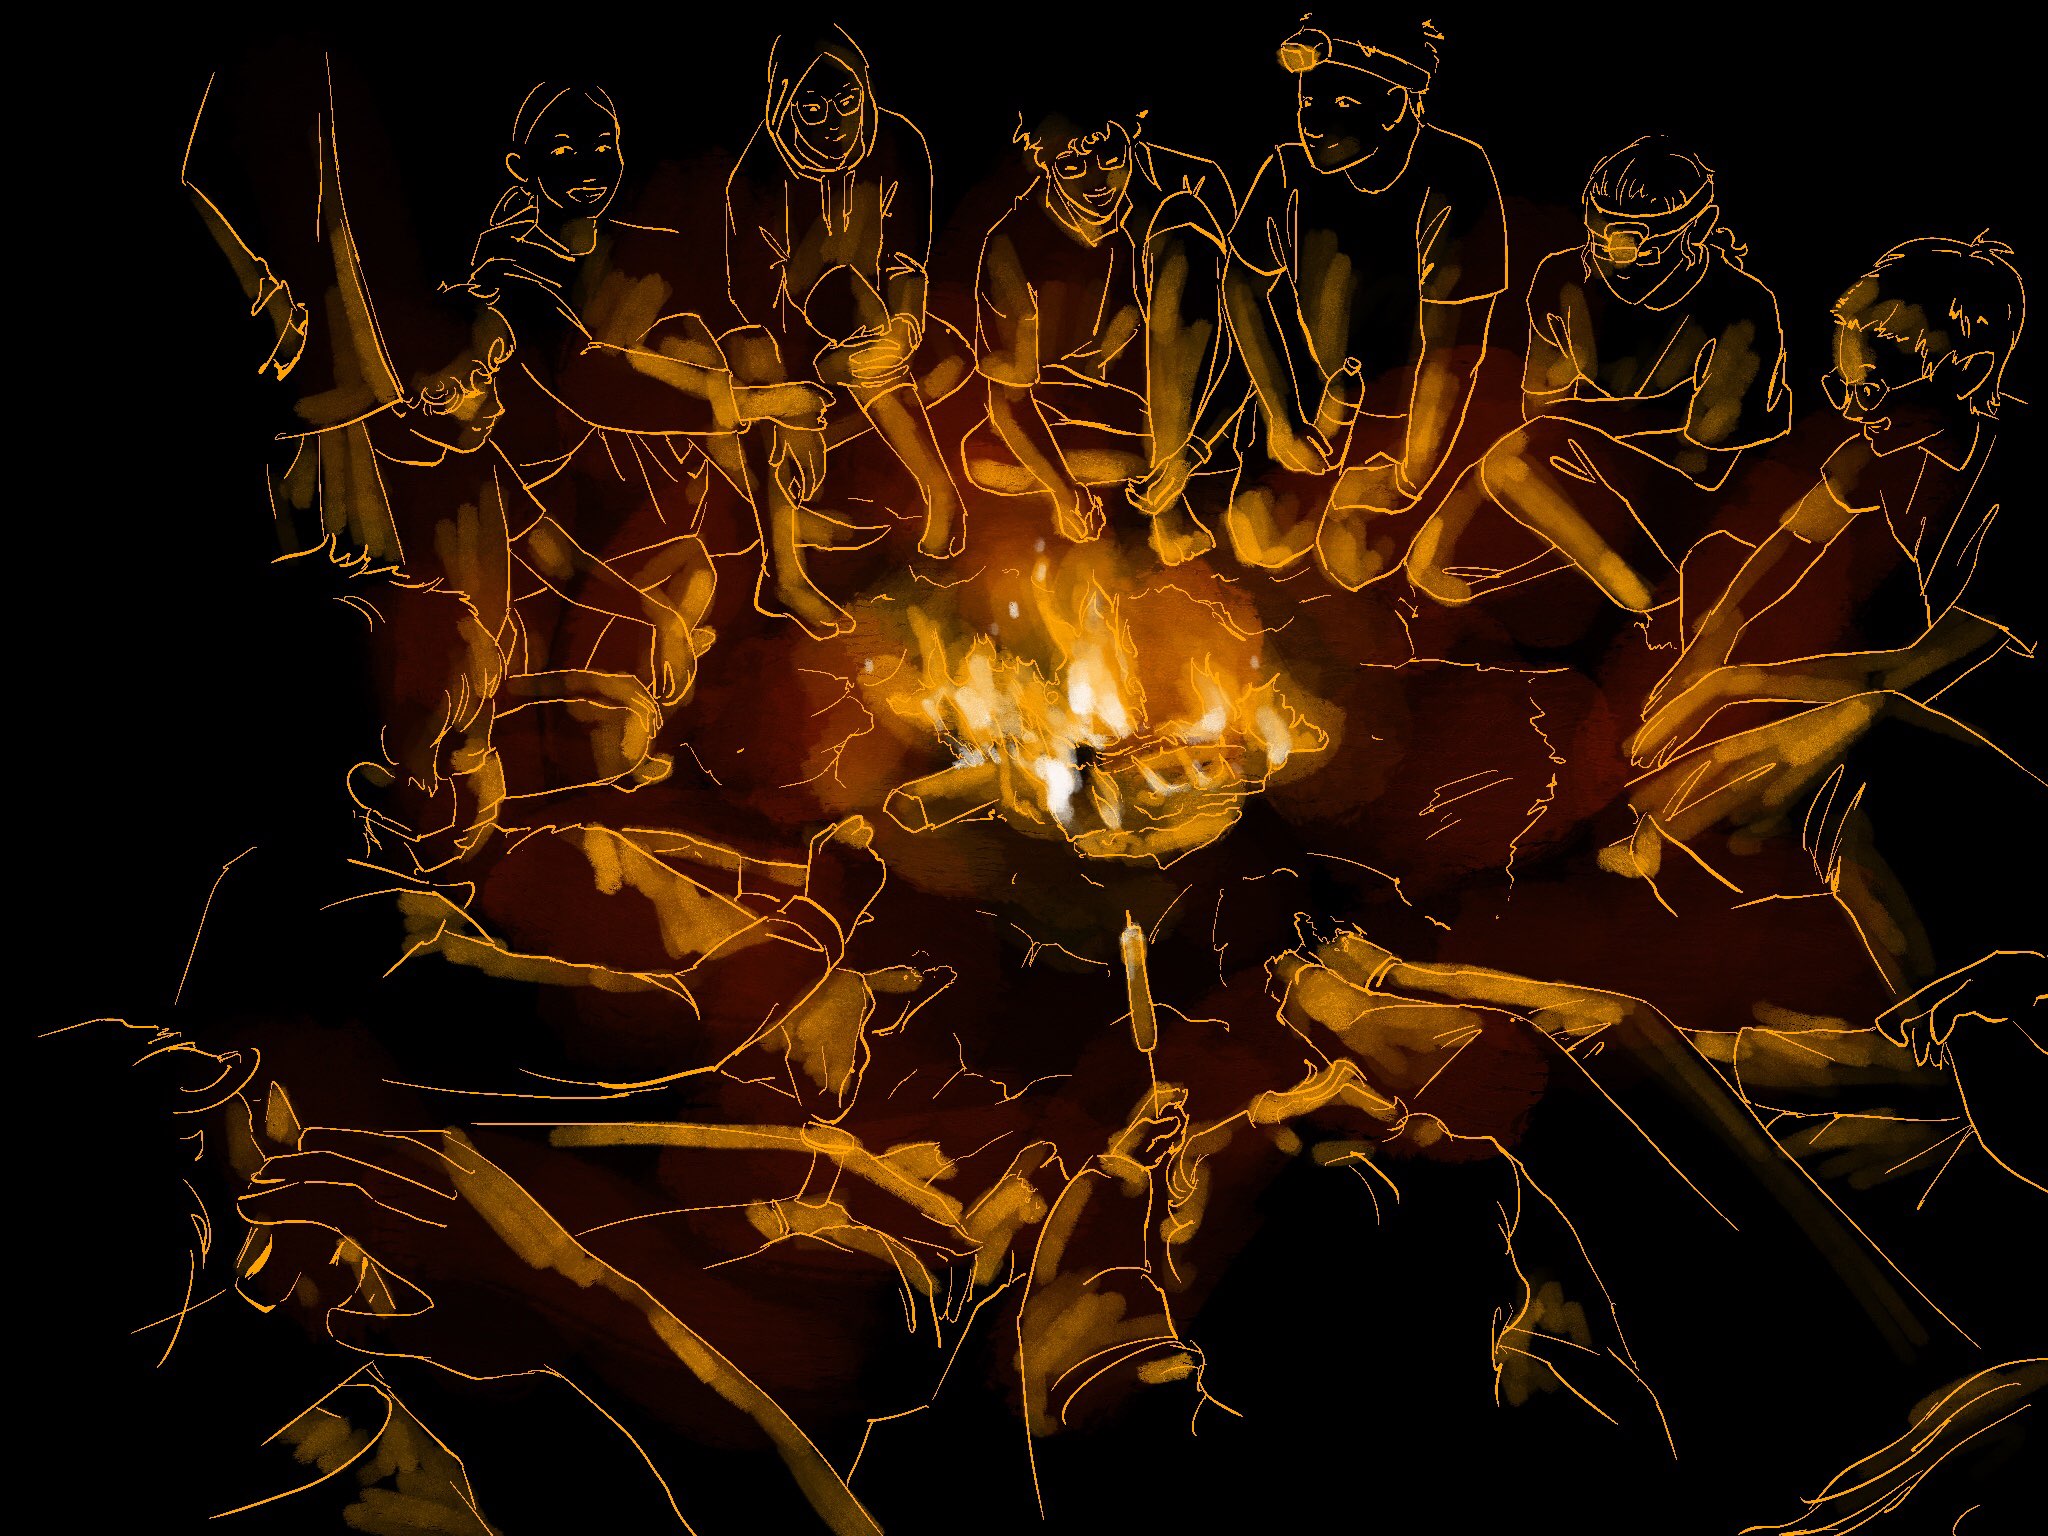 a drawing with light lines on a dark background of a group of friends sitting and chatting around a fire. One person in the foreground holds a sausage on a skewer to the fire.